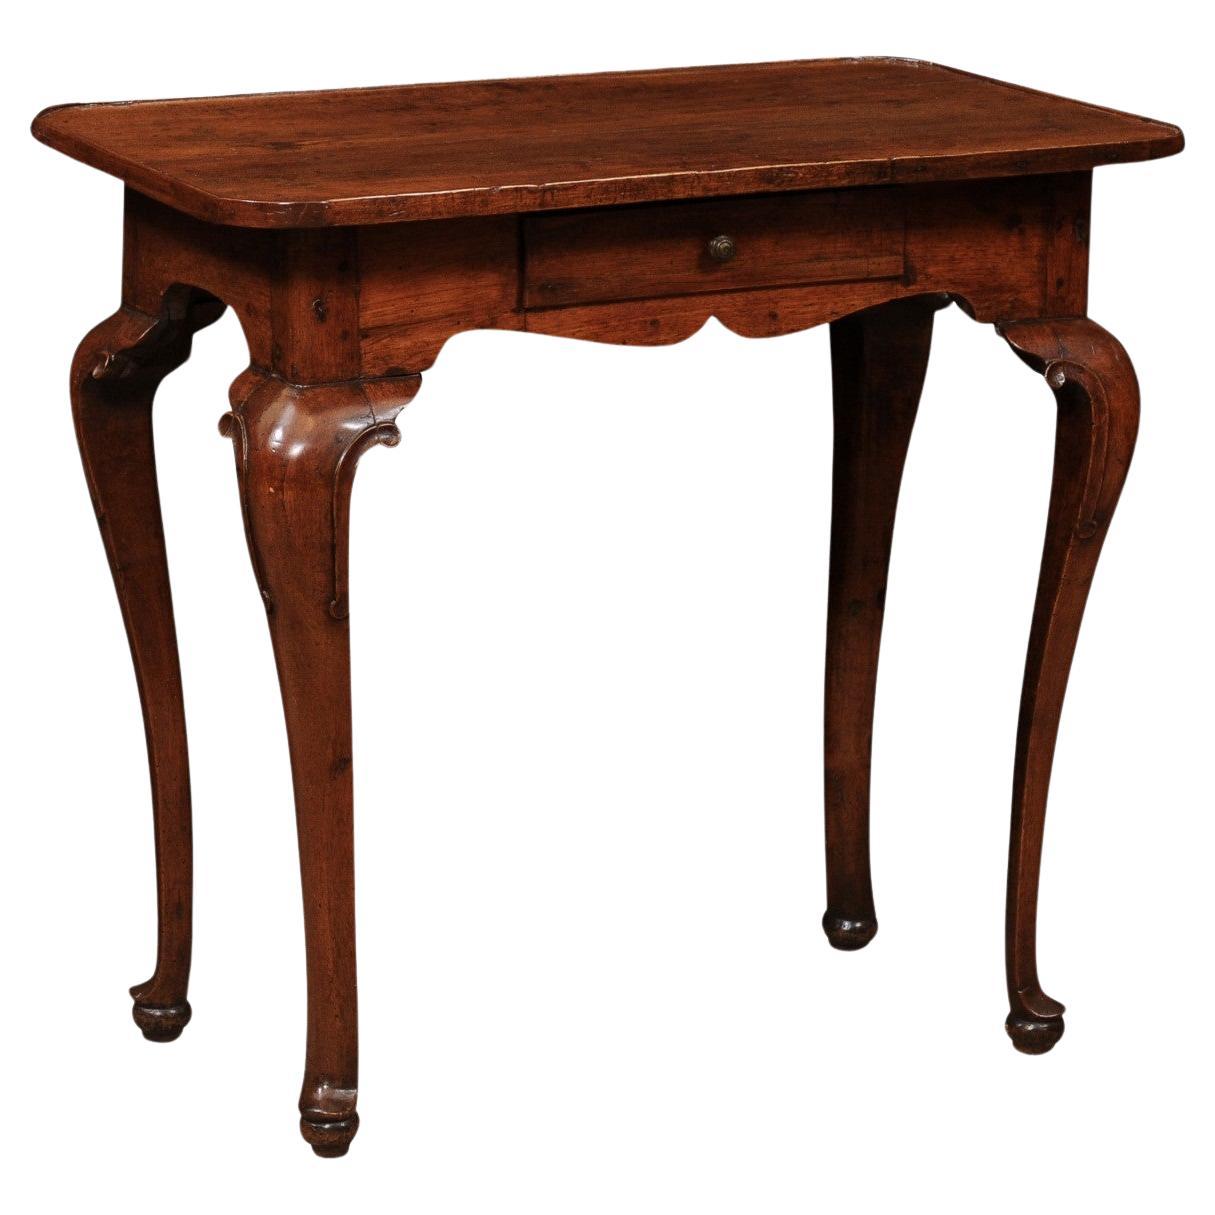 Early 18th Century Italian Walnut Side Table with Tray Top, Drawer, Cabriole Leg